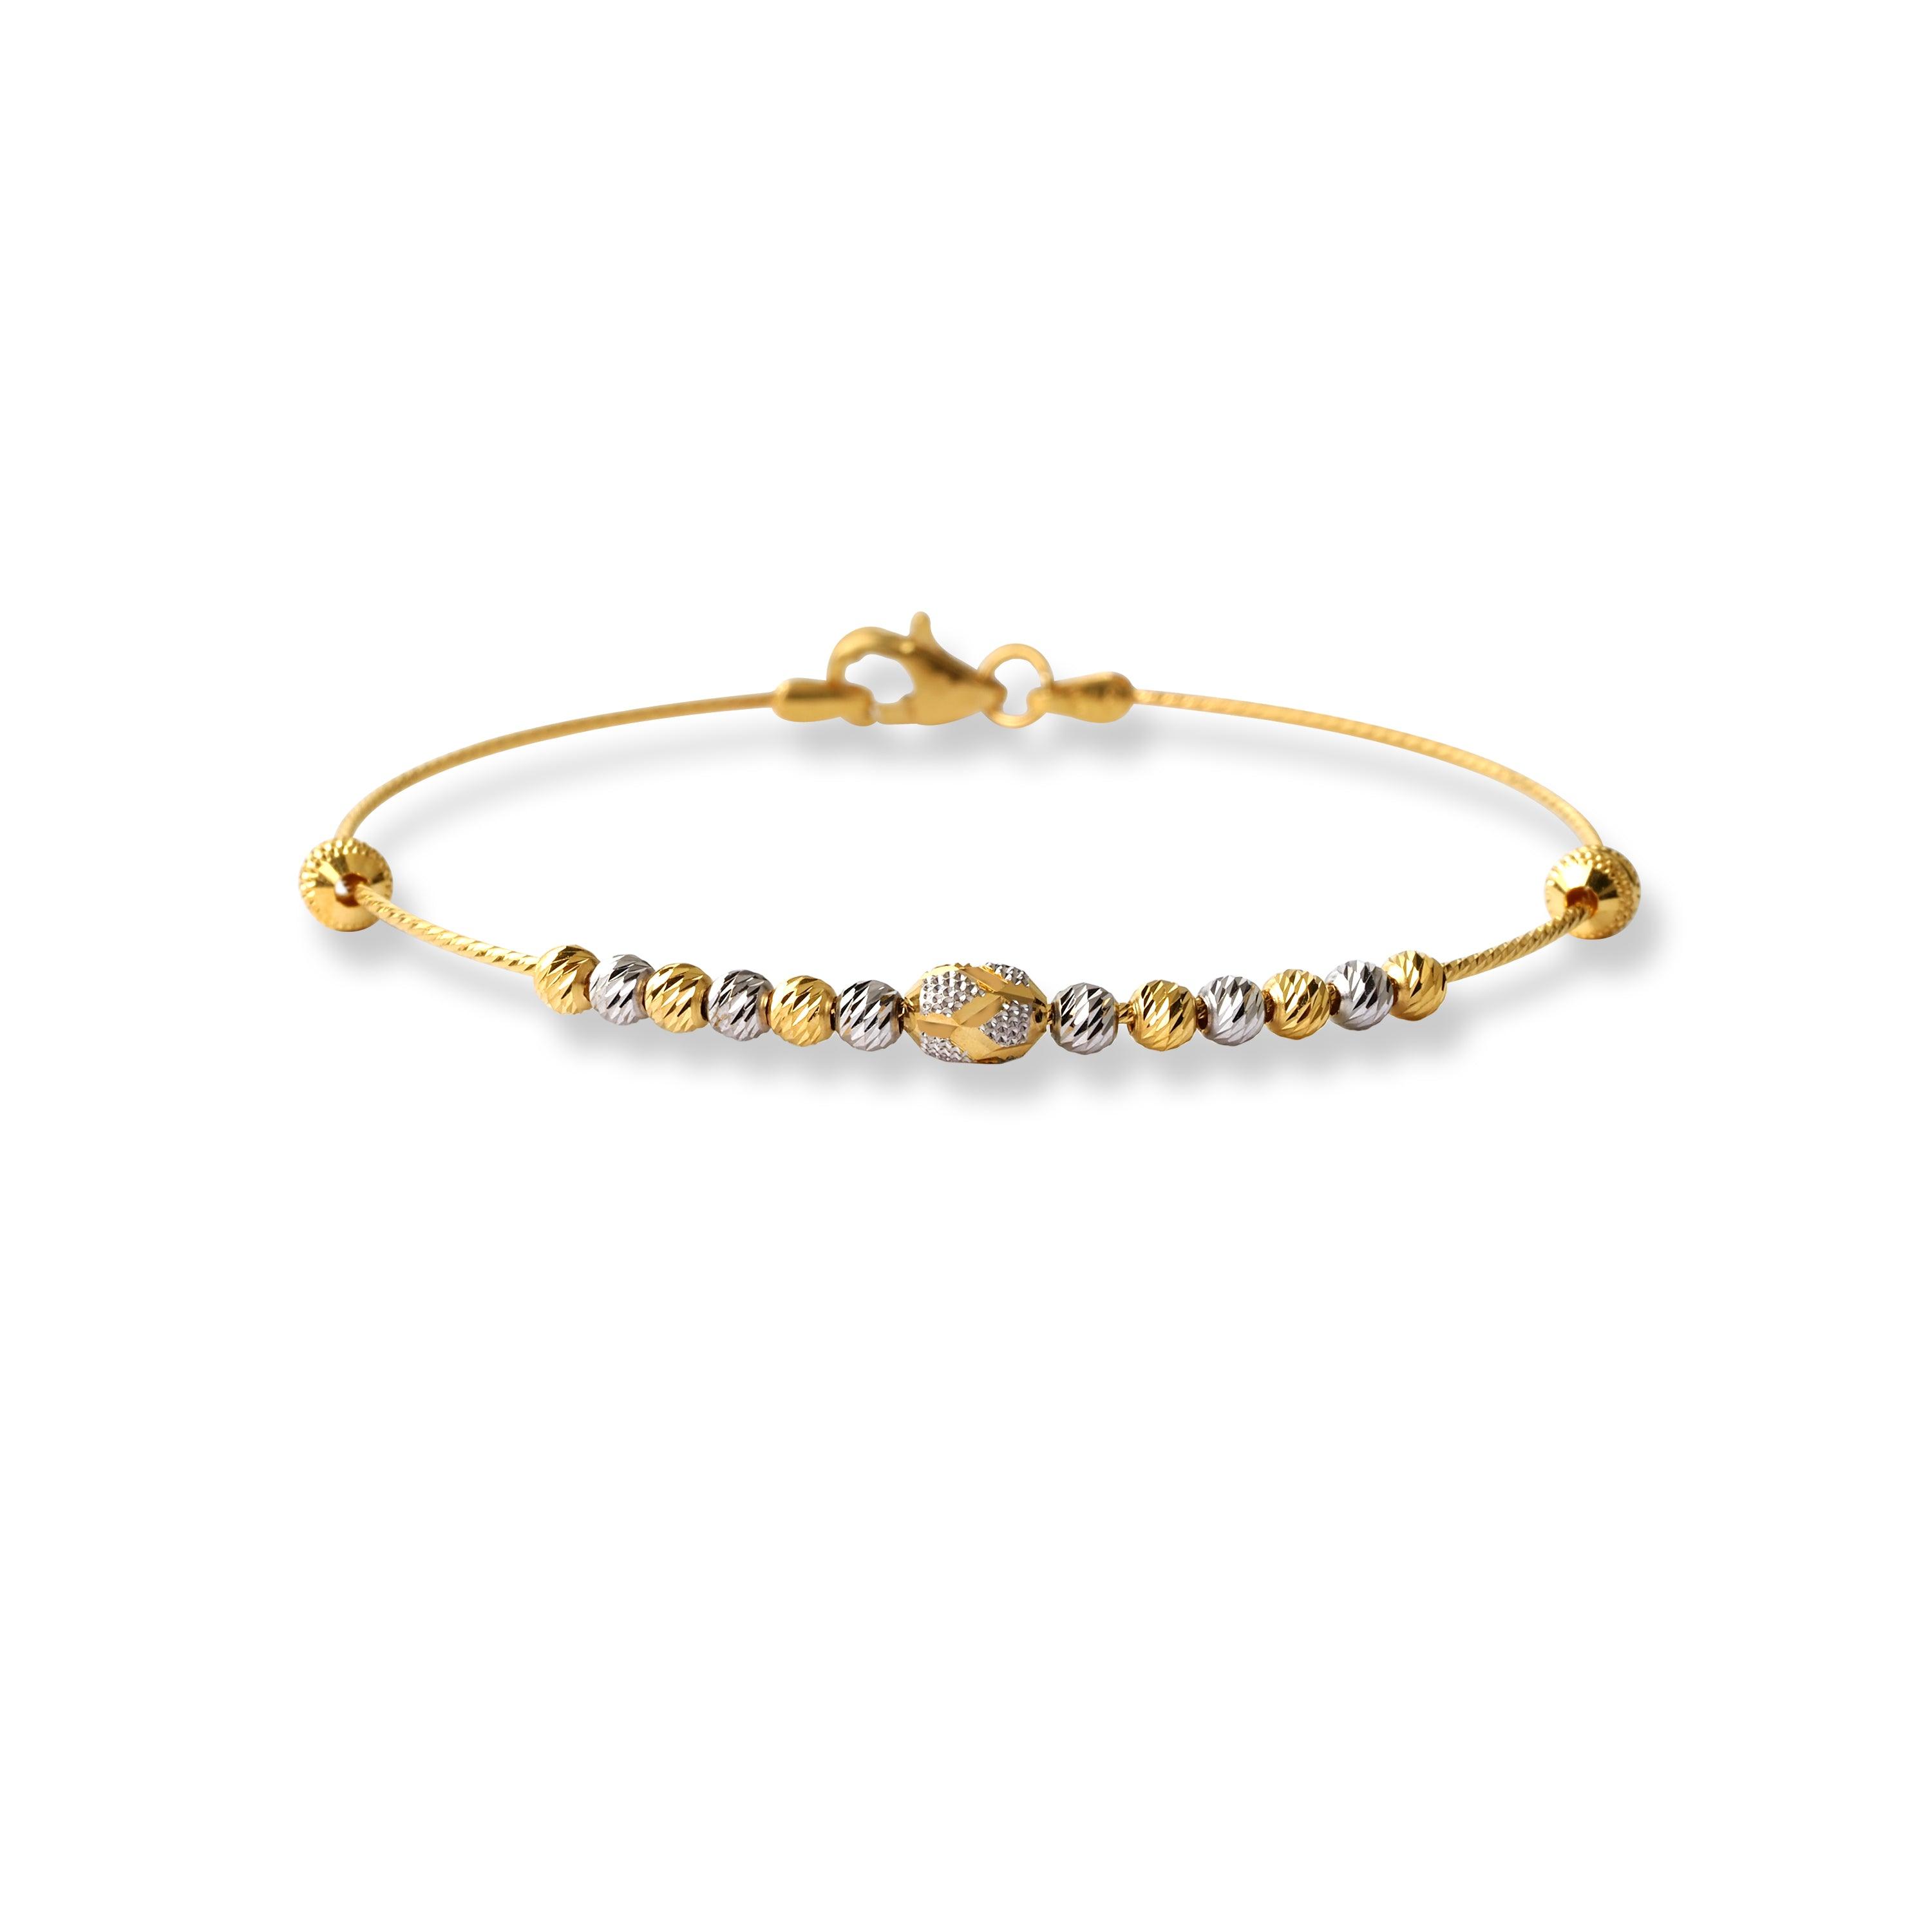 22ct Gold Rhodium Plated Beads Bangle With Rounded Trigger Clasp (4.4g) B-8533 - Minar Jewellers